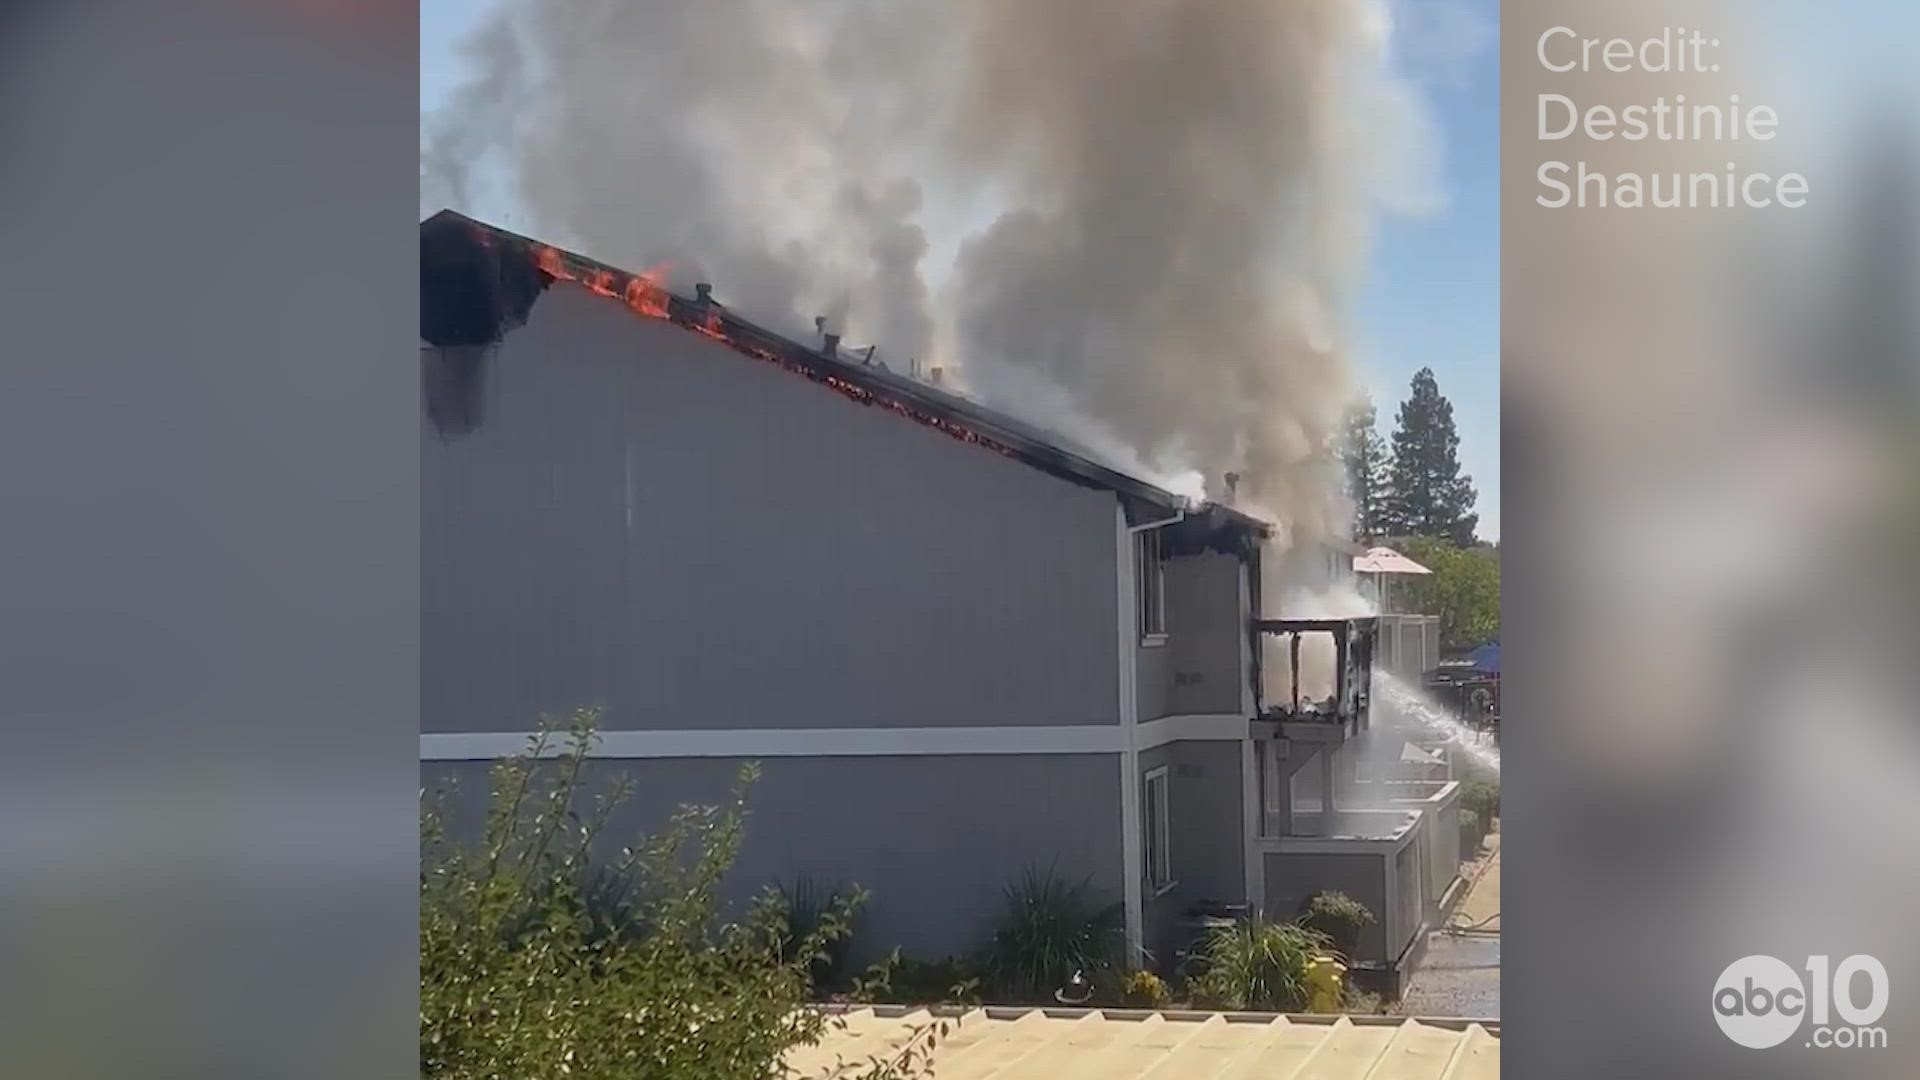 Vacaville fire fighters declared the fire at Sara Court on Thursday to be under control after one building was severely damaged in the blaze